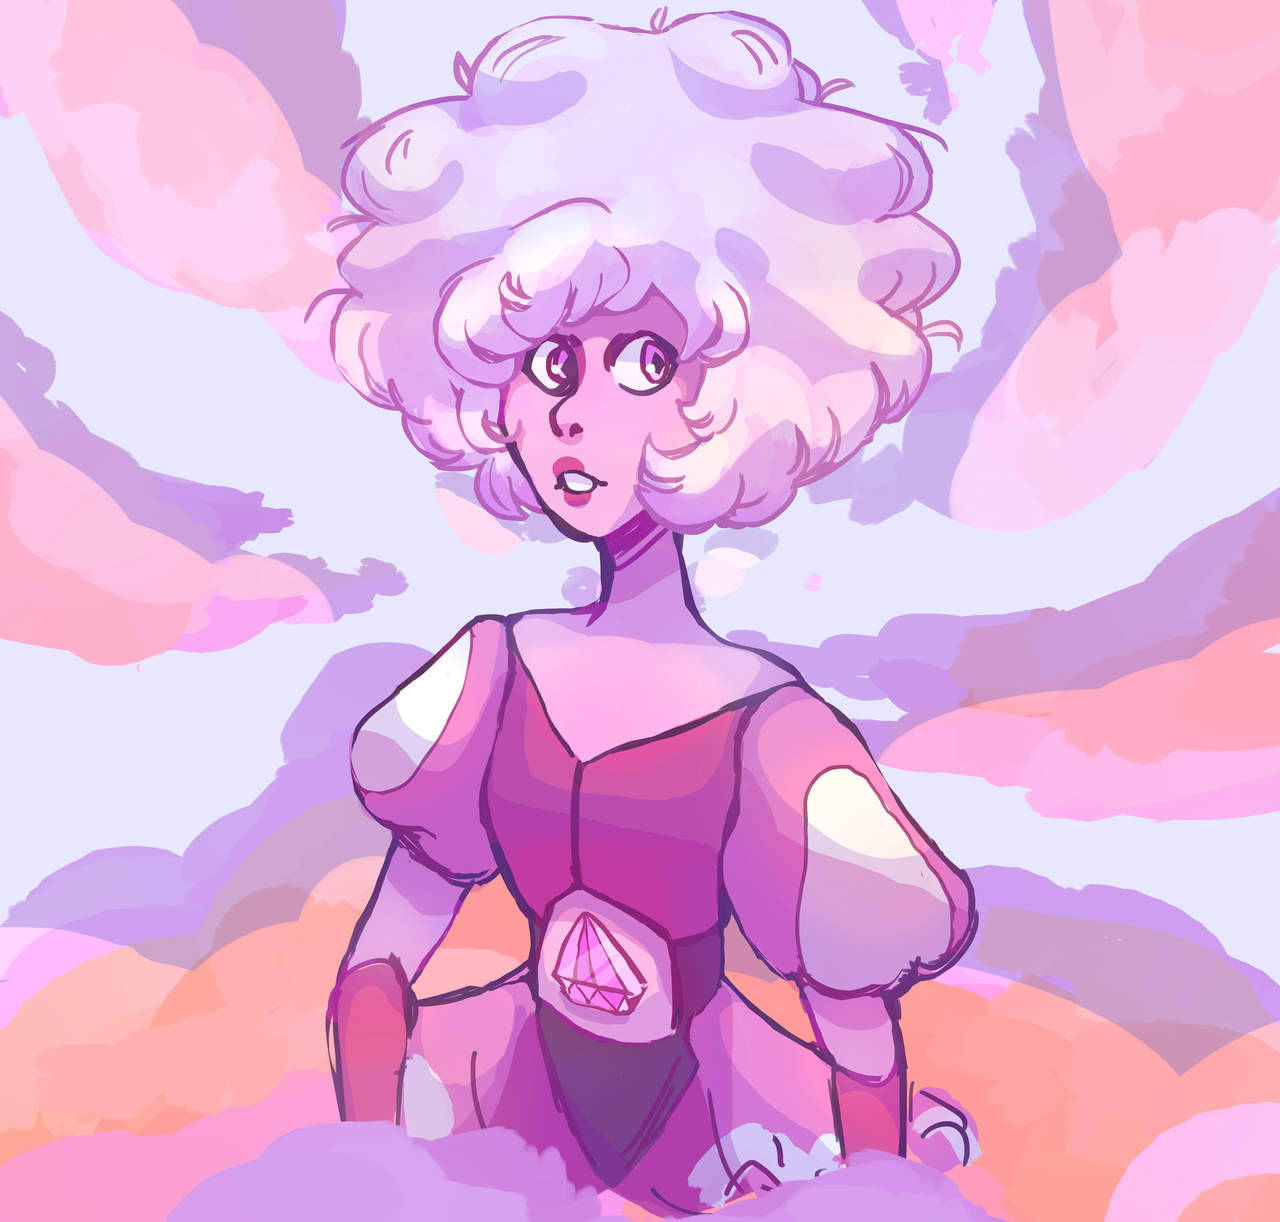 the new episode made me really like Pink